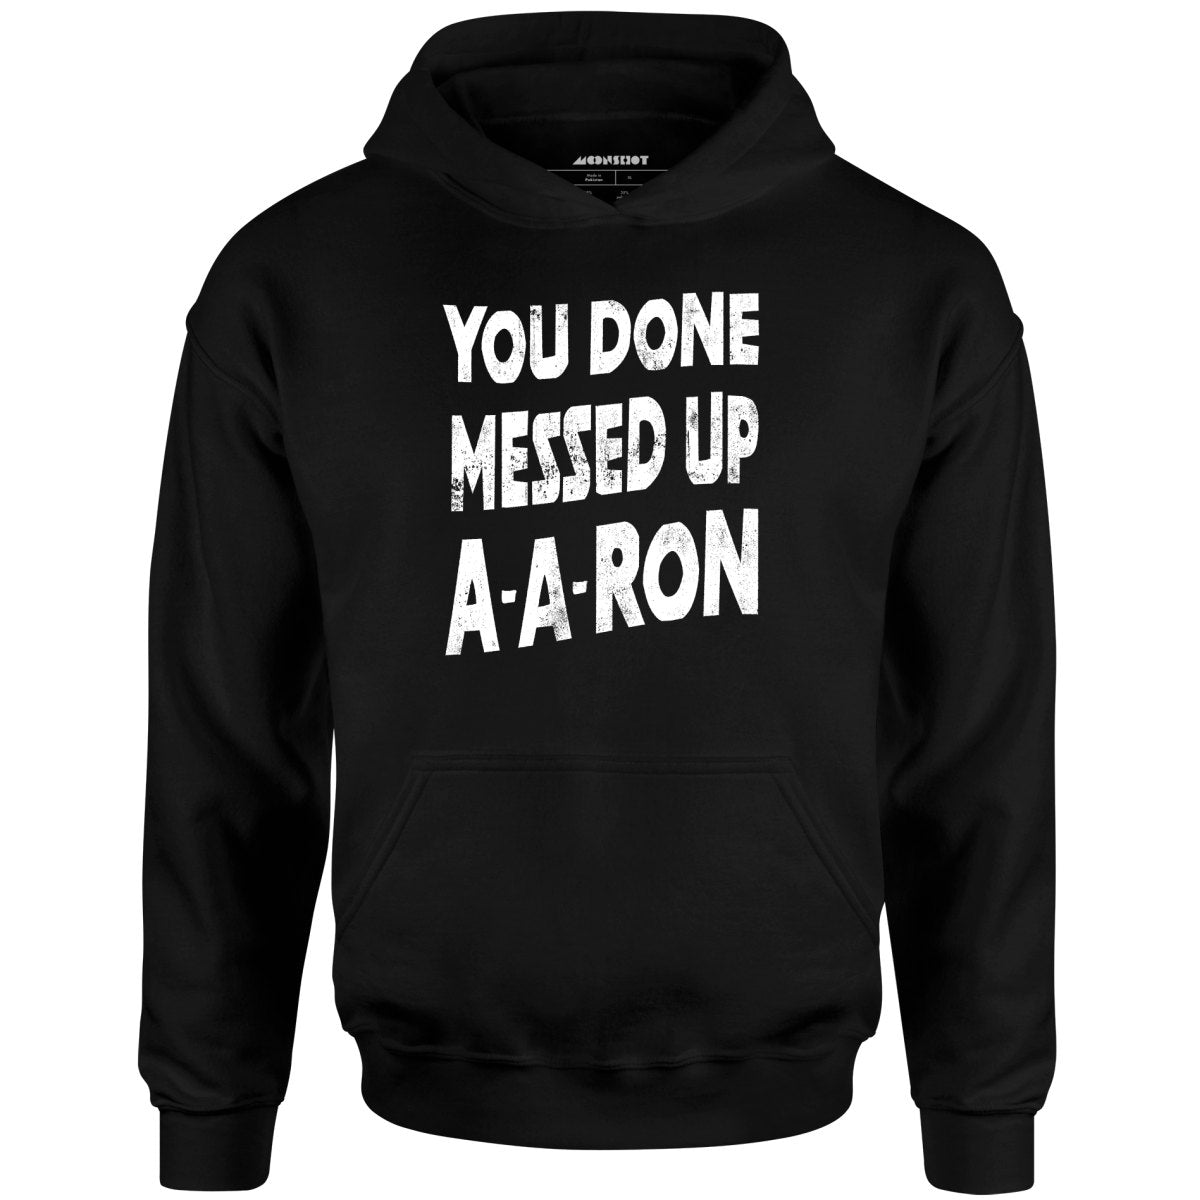 You Done Messed Up A-A-Ron - Unisex Hoodie